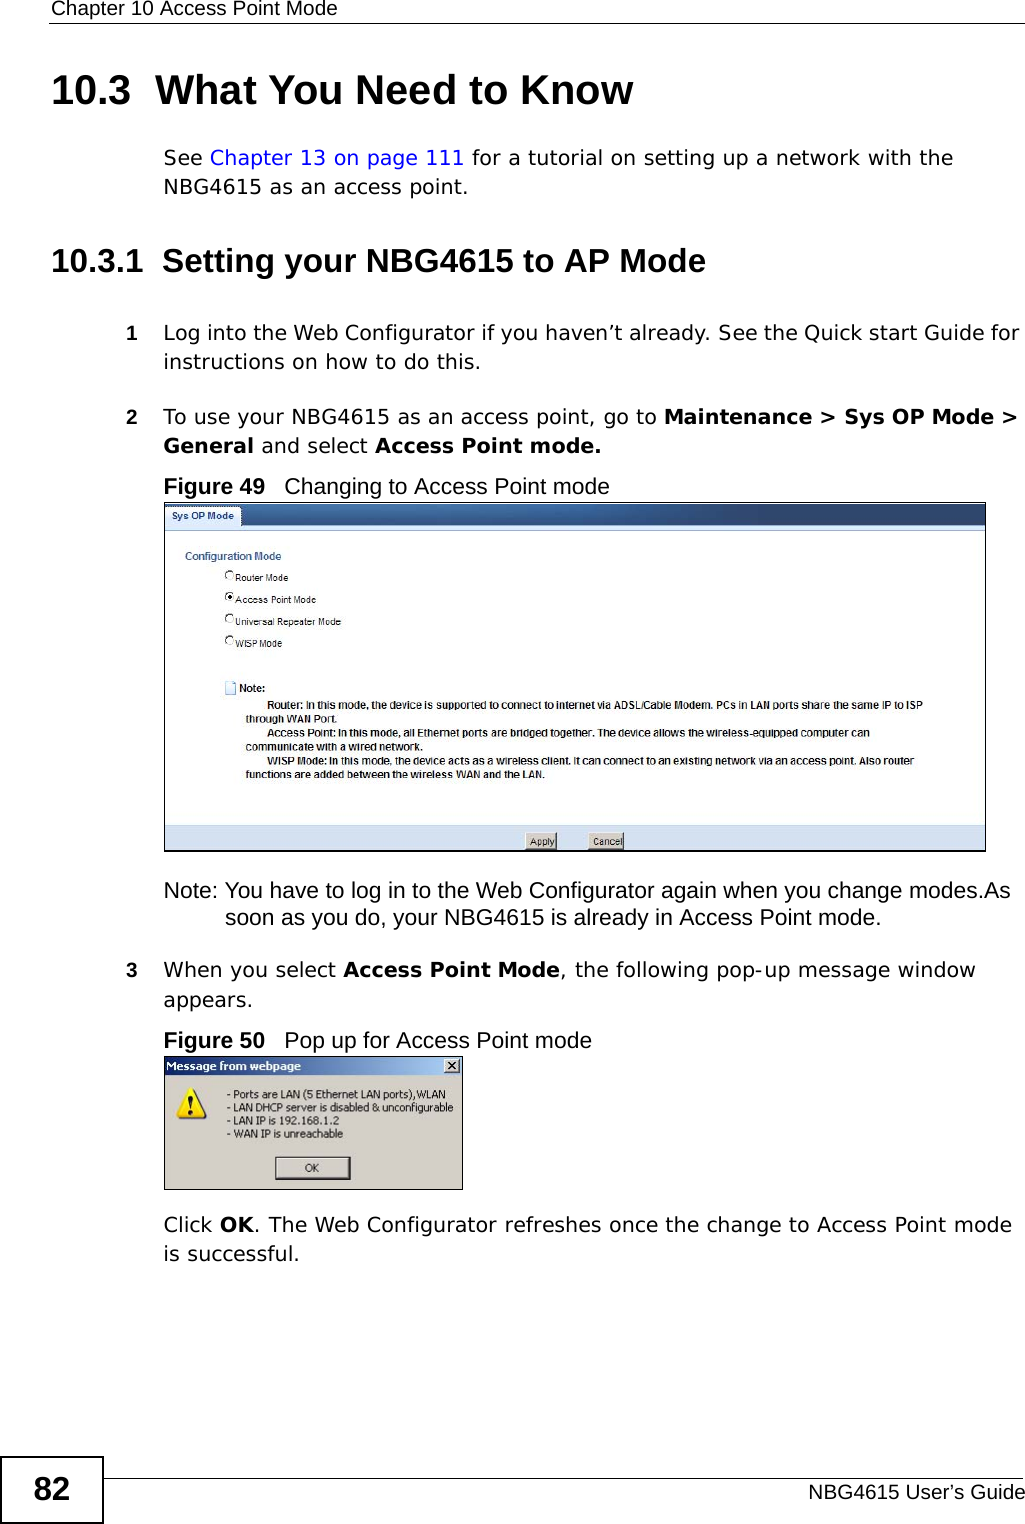 Chapter 10 Access Point ModeNBG4615 User’s Guide8210.3  What You Need to KnowSee Chapter 13 on page 111 for a tutorial on setting up a network with the NBG4615 as an access point.10.3.1  Setting your NBG4615 to AP Mode1Log into the Web Configurator if you haven’t already. See the Quick start Guide for instructions on how to do this.2To use your NBG4615 as an access point, go to Maintenance &gt; Sys OP Mode &gt; General and select Access Point mode. Figure 49   Changing to Access Point modeNote: You have to log in to the Web Configurator again when you change modes.As soon as you do, your NBG4615 is already in Access Point mode.3When you select Access Point Mode, the following pop-up message window appears.Figure 50   Pop up for Access Point mode Click OK. The Web Configurator refreshes once the change to Access Point mode is successful.